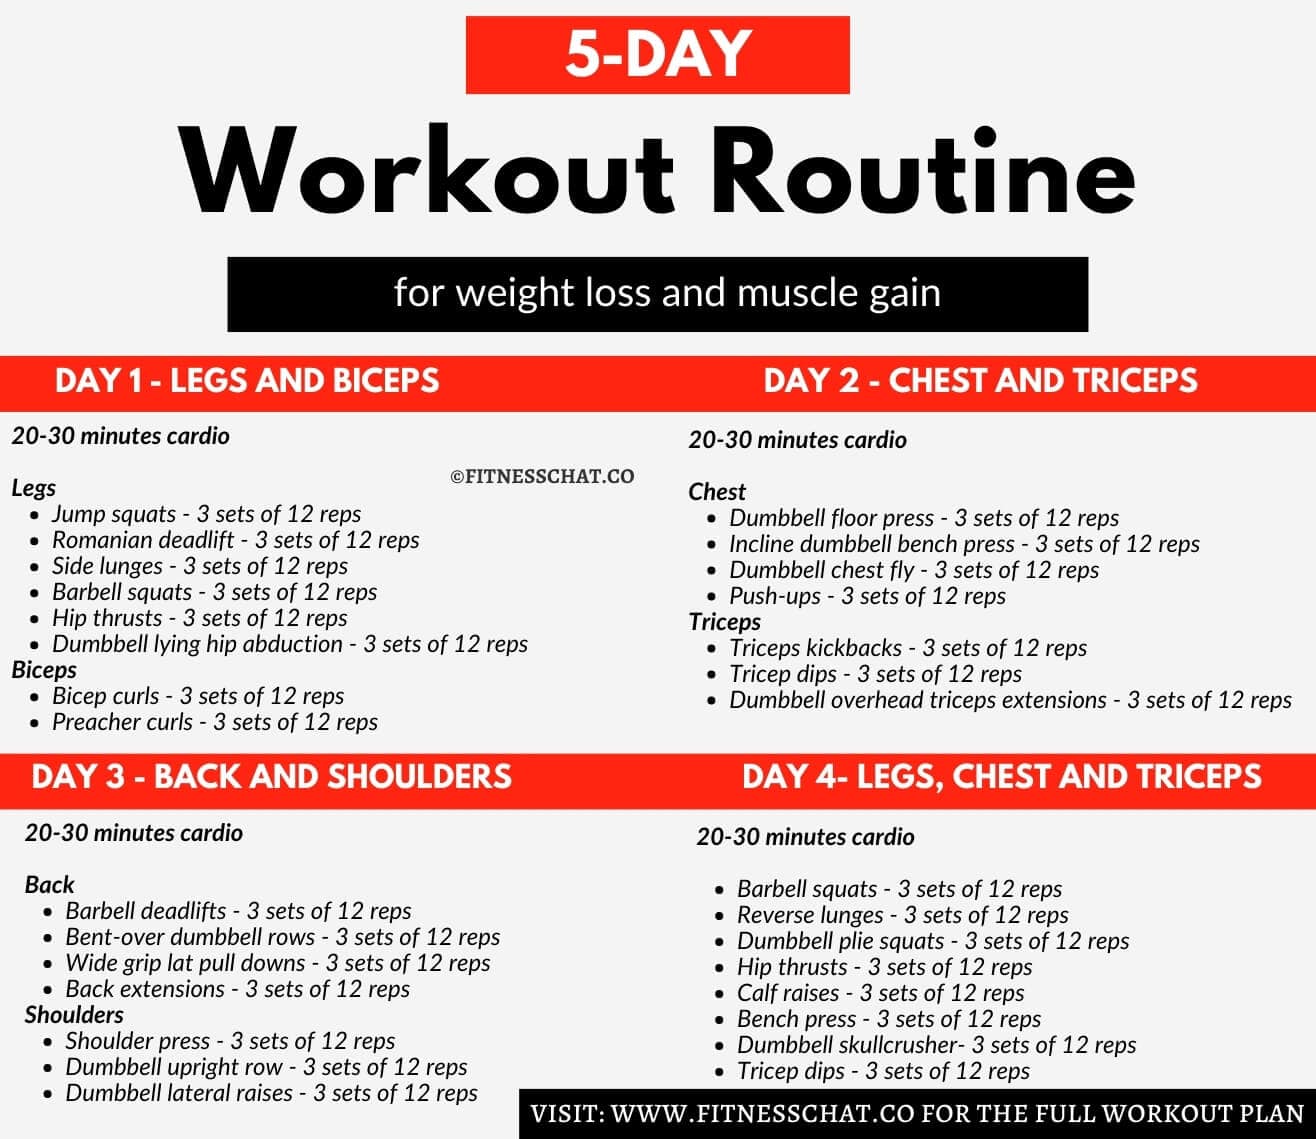 5-Day Workout Routine for Weight Loss and Muscle Gain